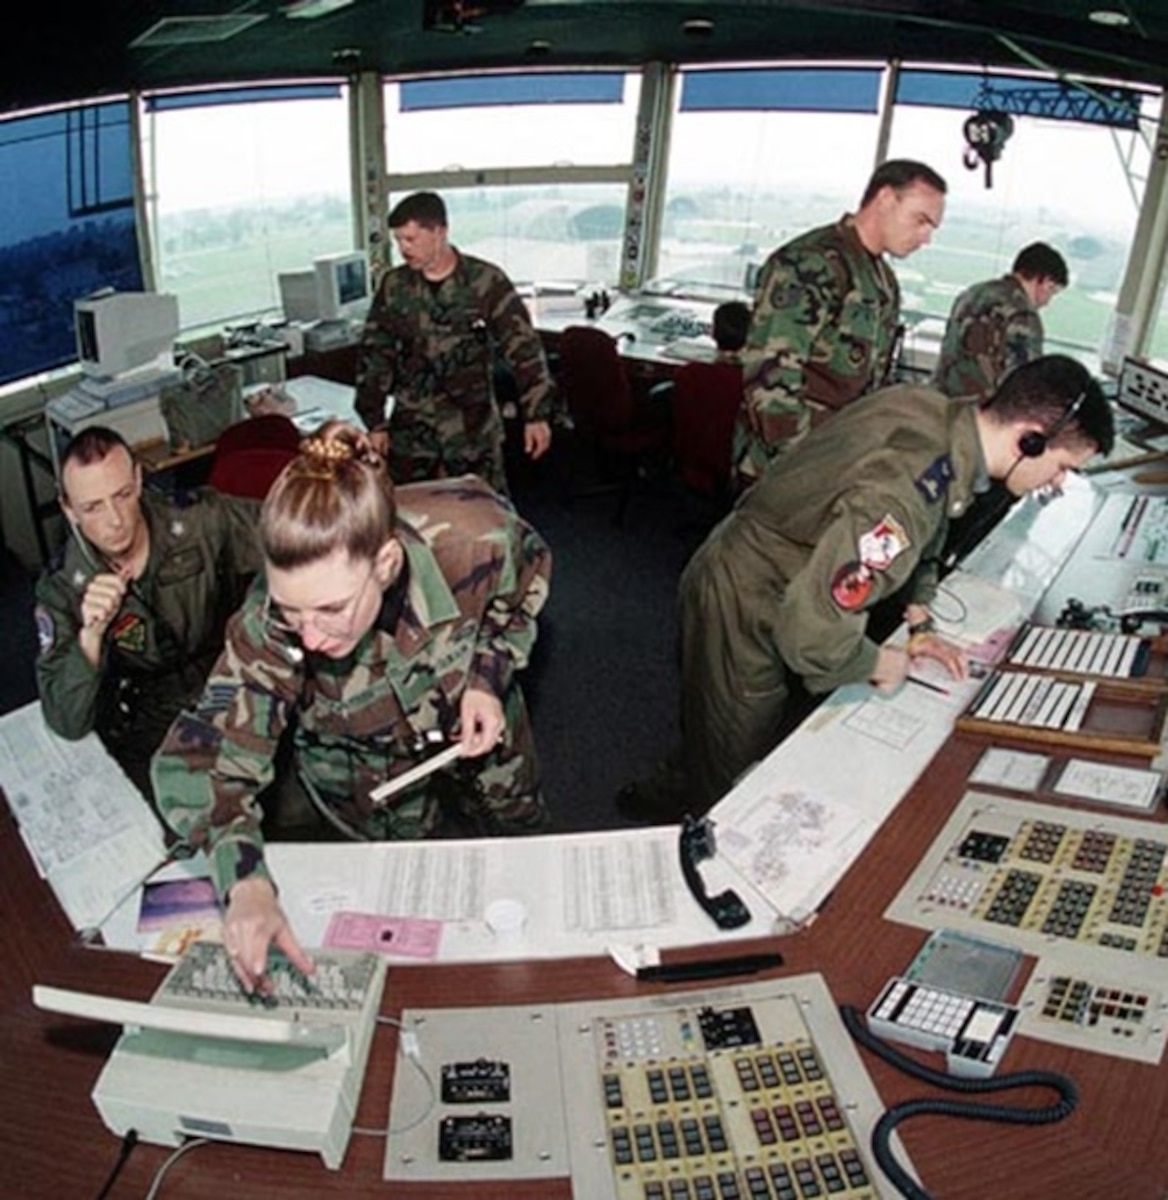 A photo of Airmen working in a tower.